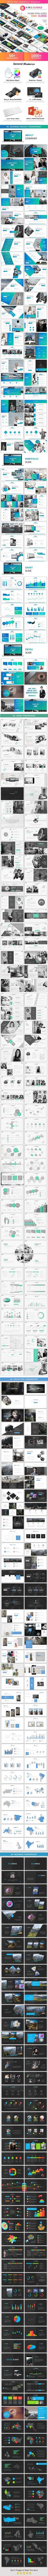 GraphicRiver 4 in 1 Creative Bundle Powerpoint 21173545